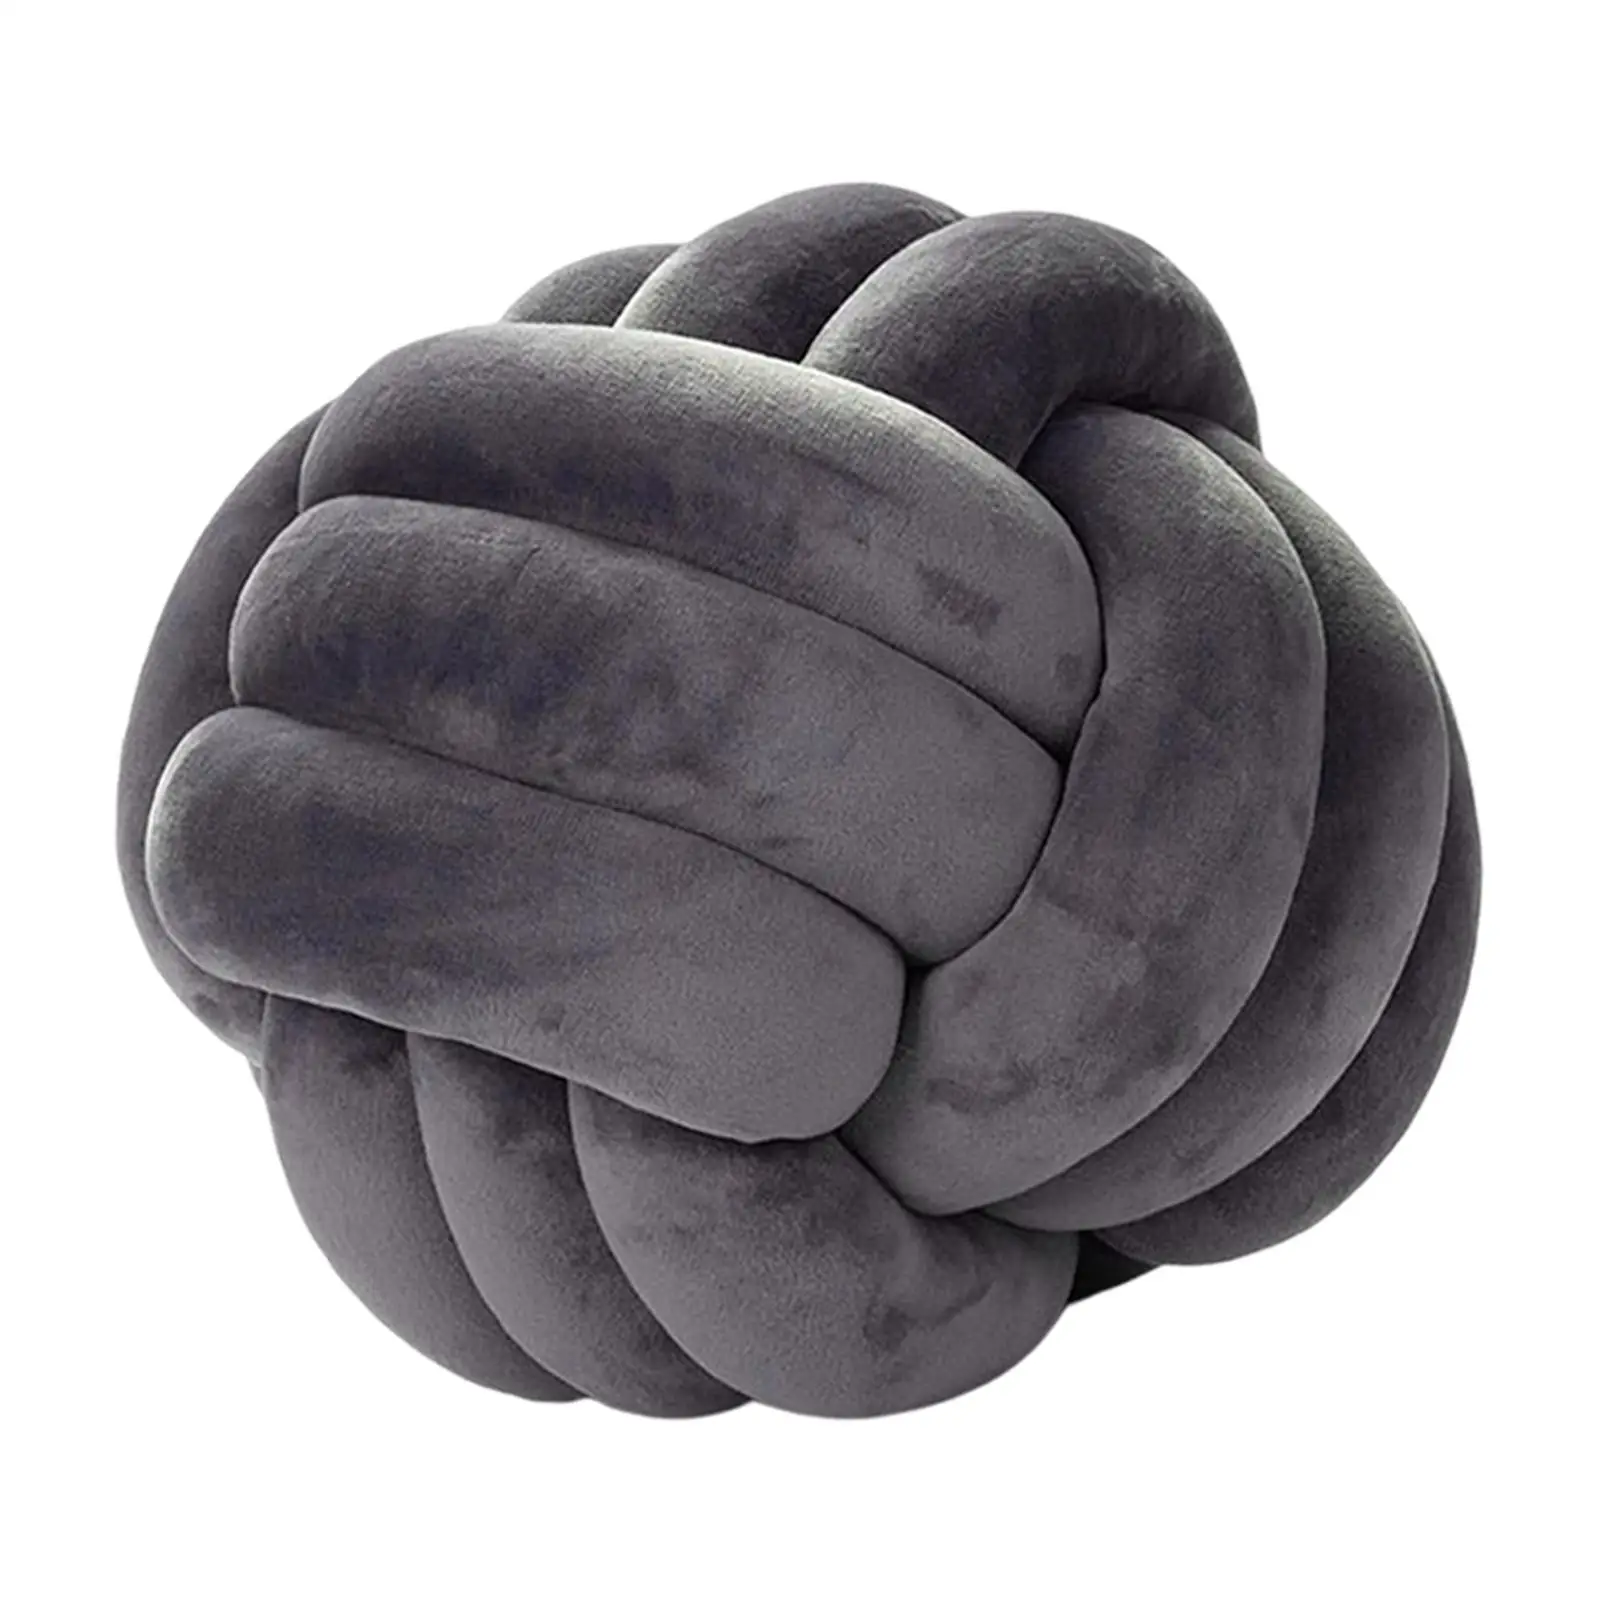 Round Knot Ball Pillow Photography Props Round Hand Woven Throw Pillow Toy Decorative for Sofa Bed Home Decoration 8